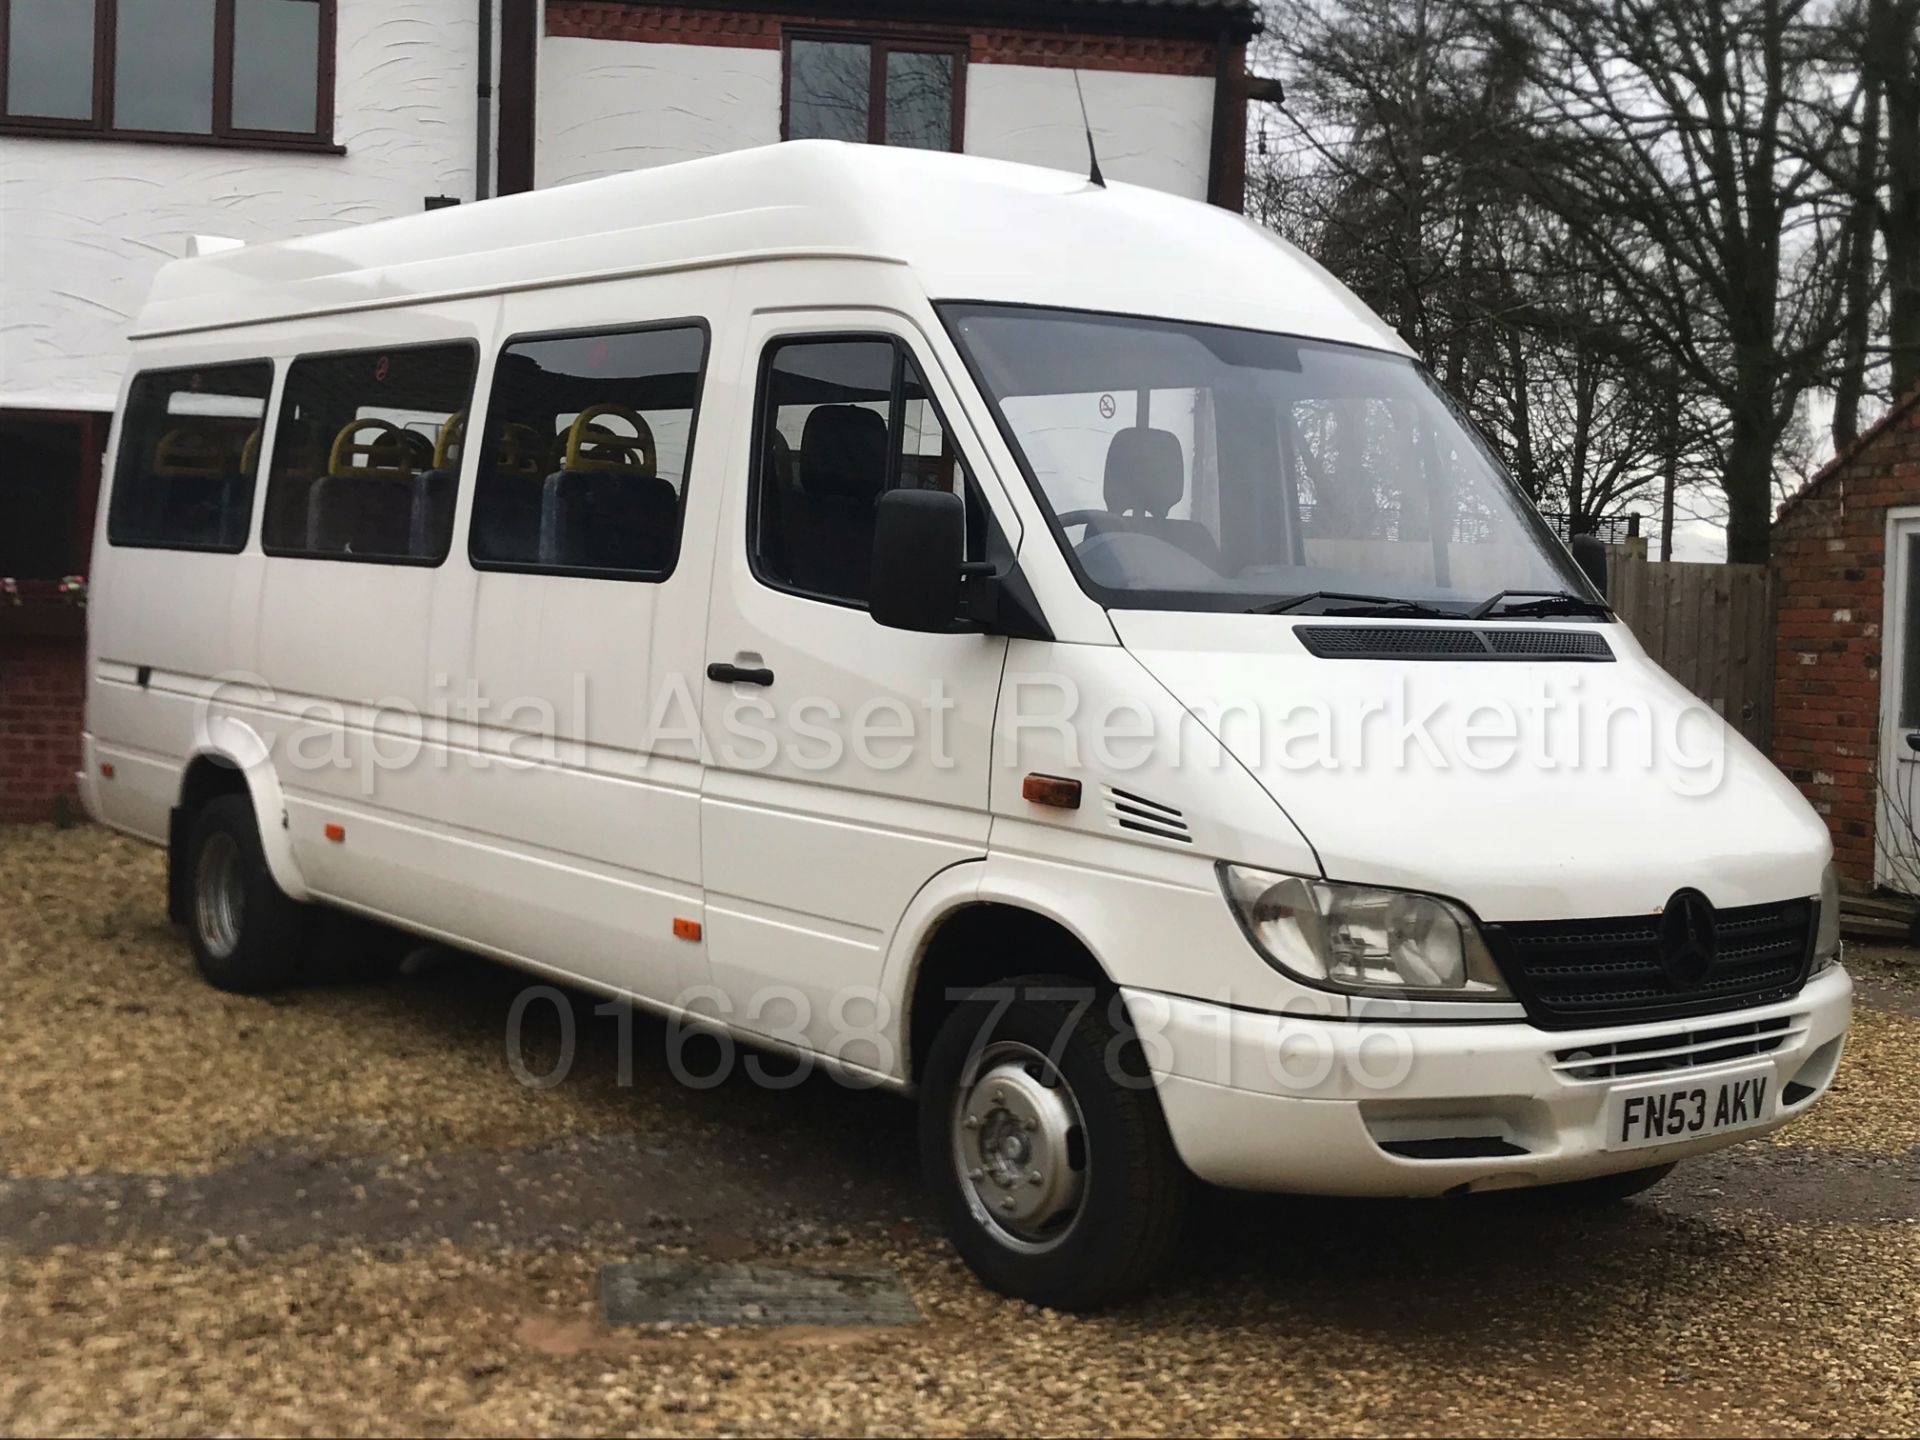 (ON SALE) MERCEDES-BENZ 411 CDI 'LWB - 16 SEATER MINI-BUS' (2004 MODEL) 'COACH INTERIOR' WHEEL CHAIR - Image 9 of 25